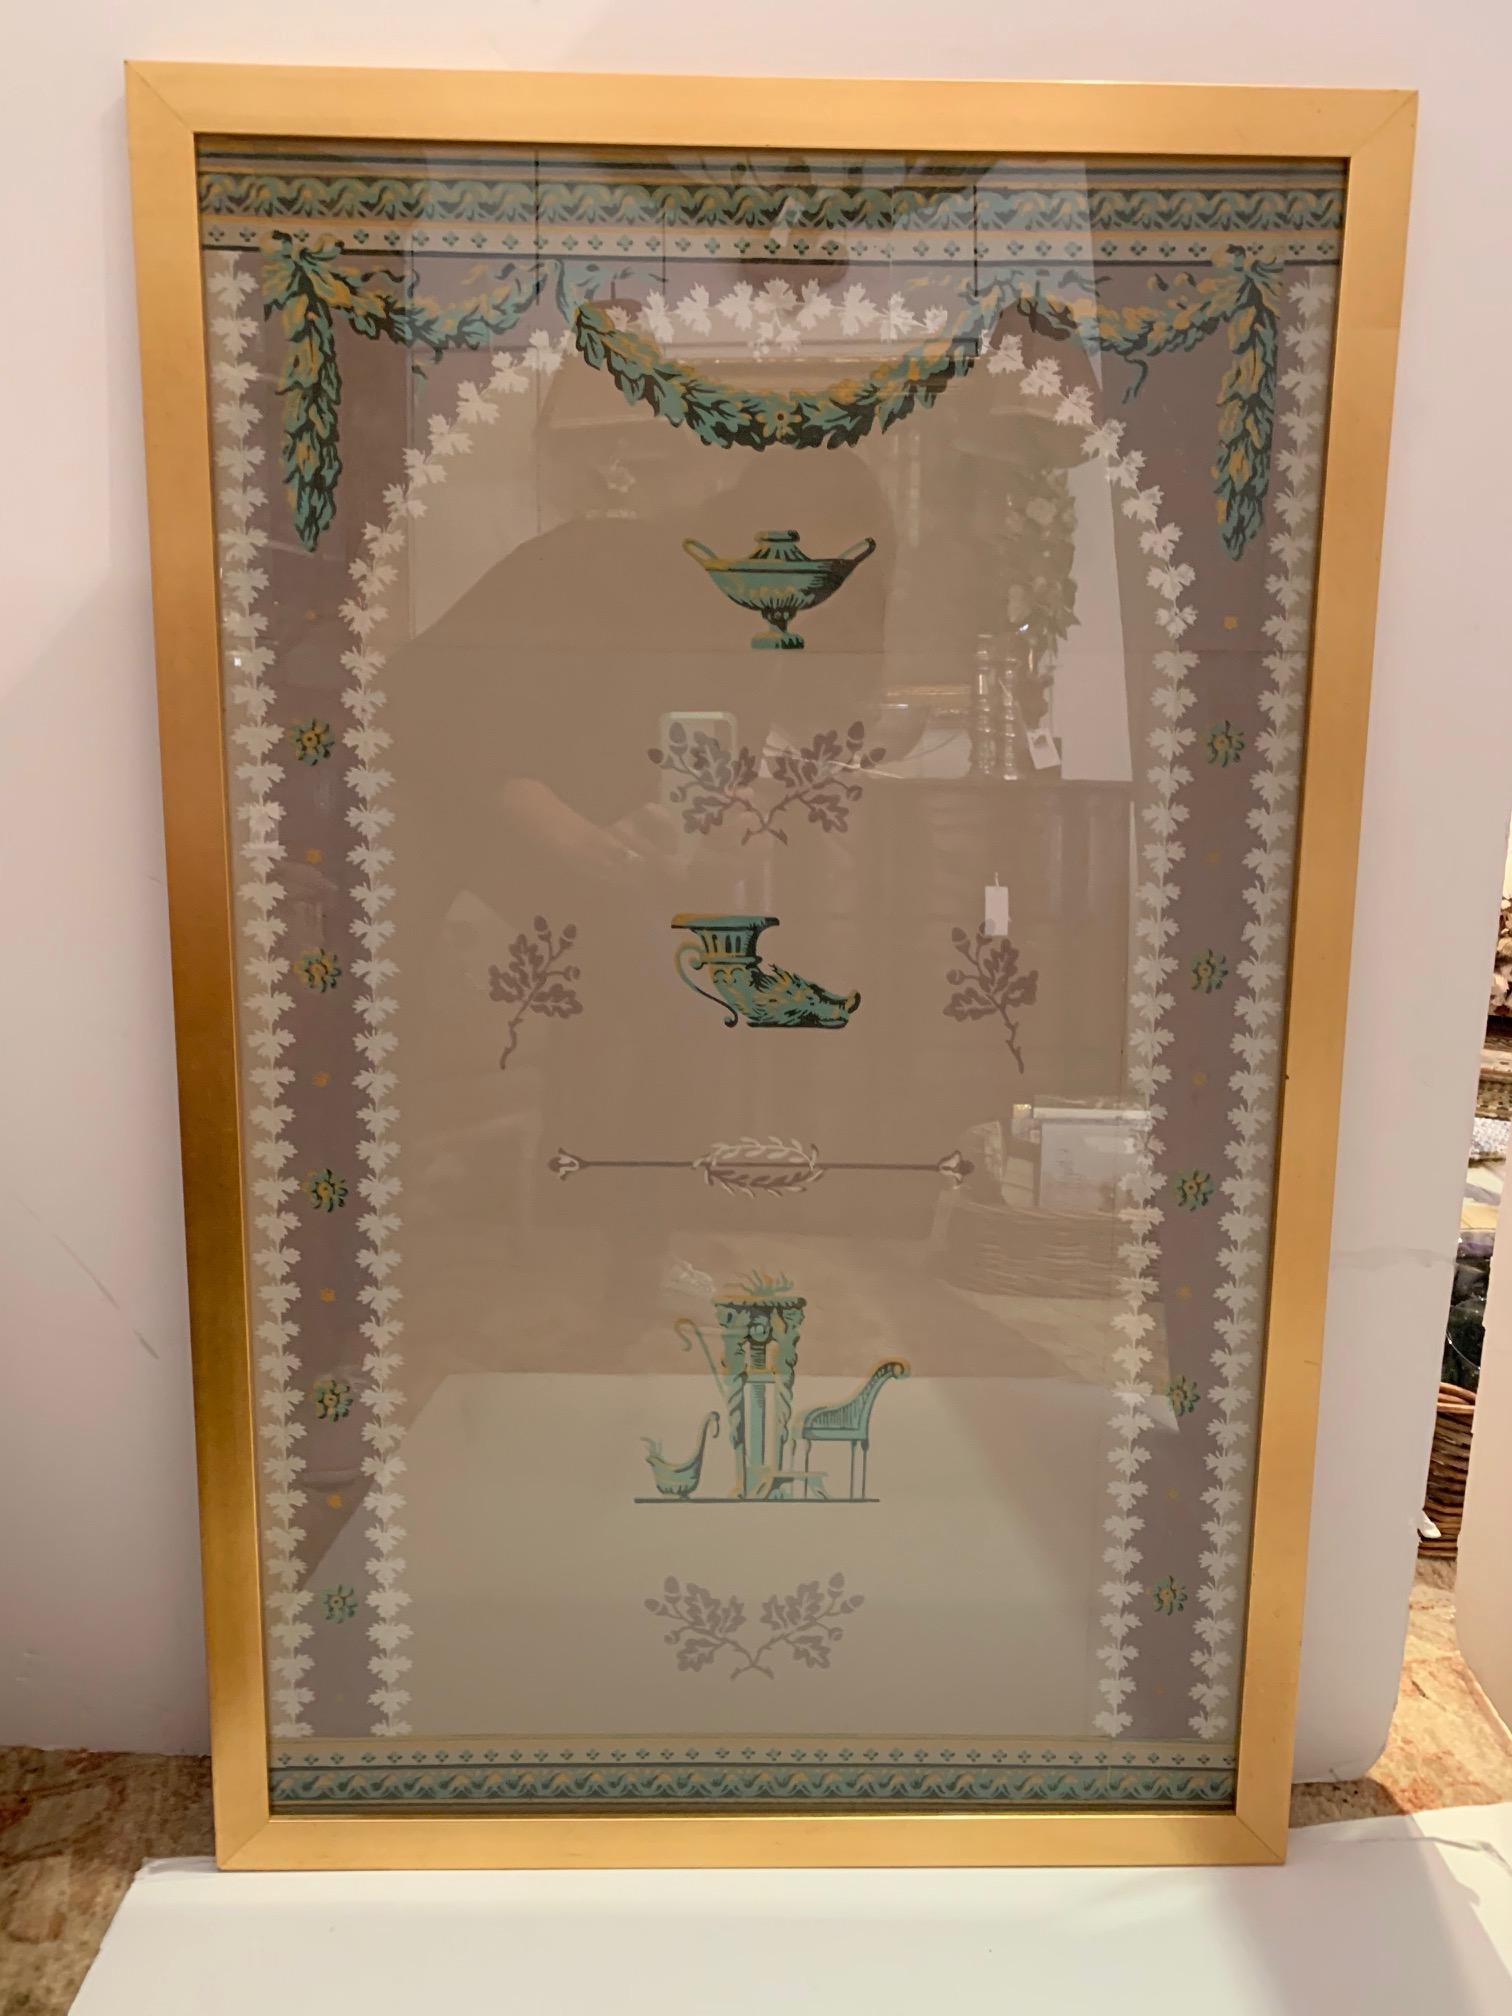 A beautiful framed Empire style wallpaper panel having an urn, rython and brazier supported by catyatids arranged within a garland festooned arcade.
Was salvaged from the 1960 restoration of the Deshon-Allyn House in New London Ct.
Hand printed